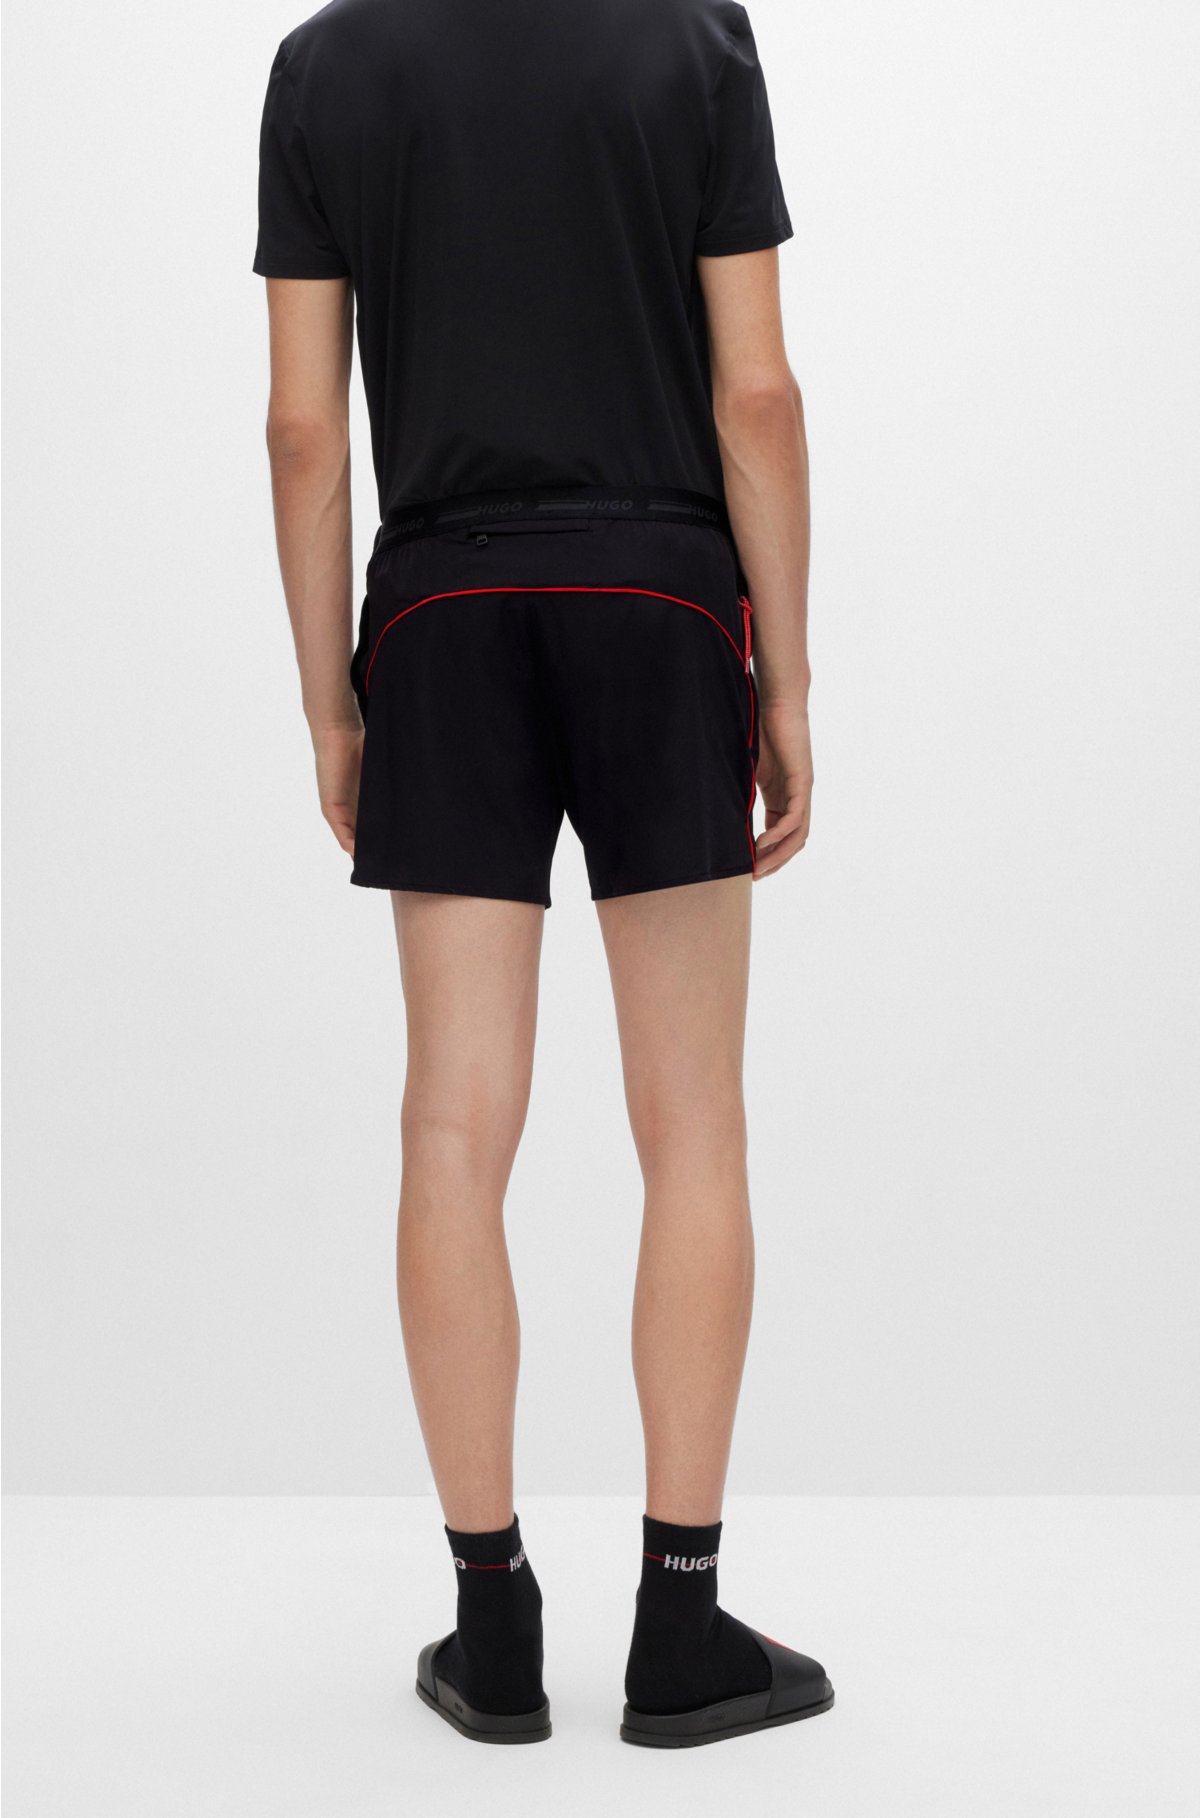 capsule and - HUGO logo Super-stretch shorts piping with